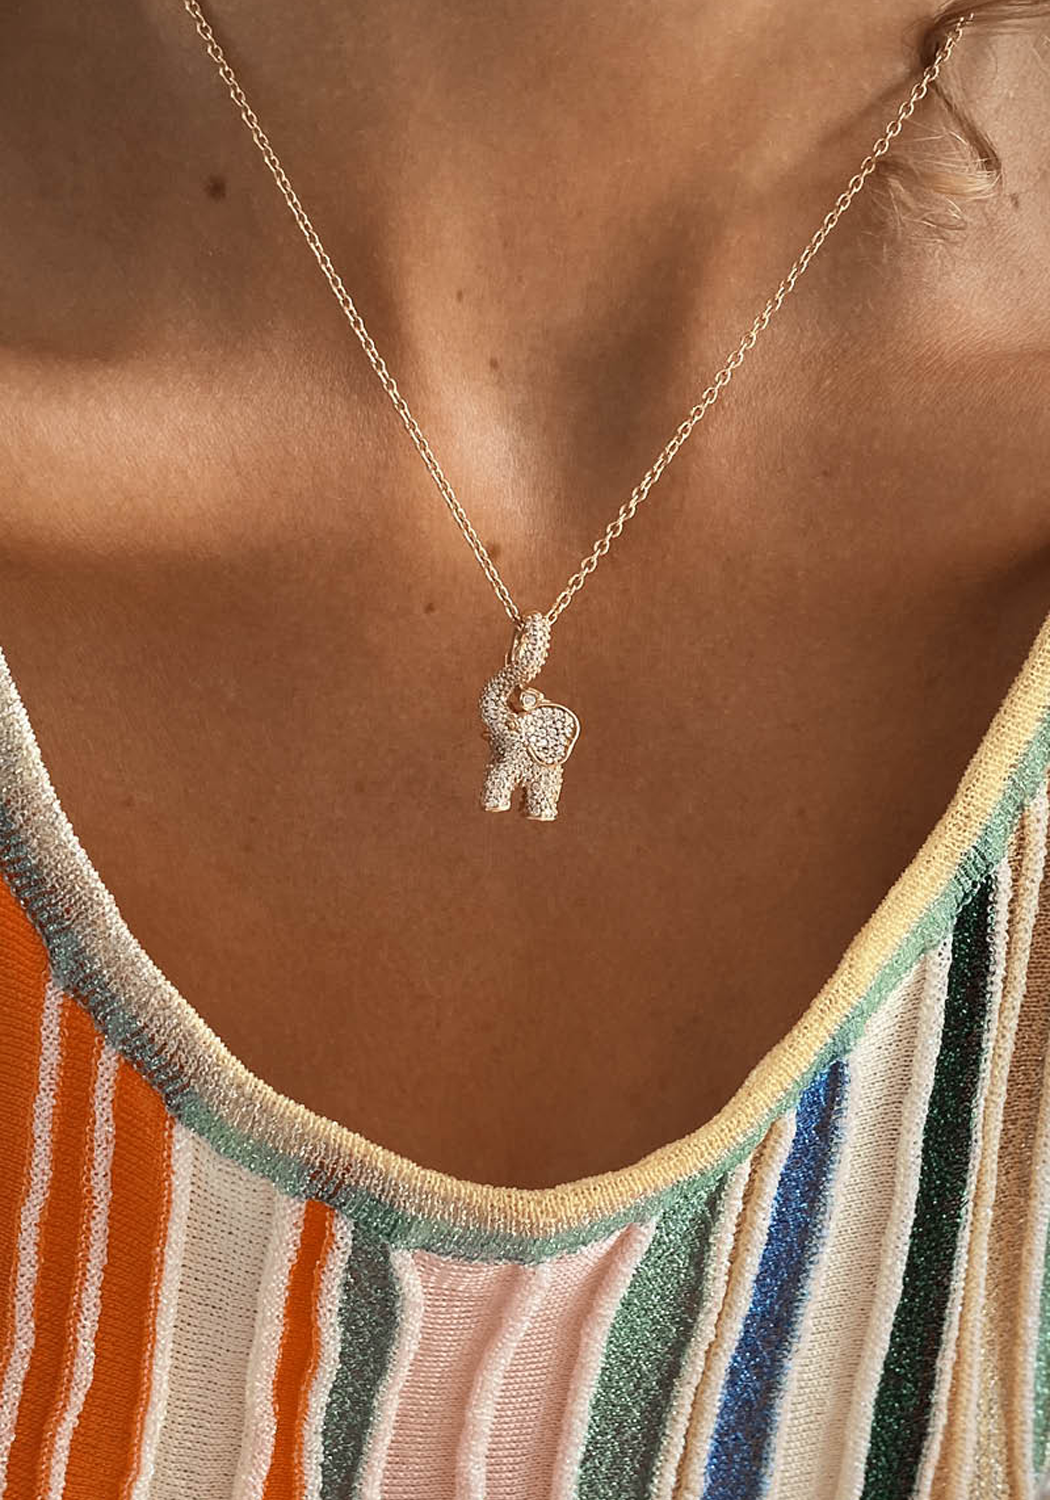 Ole Lynggaard Pave Diamond Elephant Charm (Chain sold separately) | OsterJewelers.com